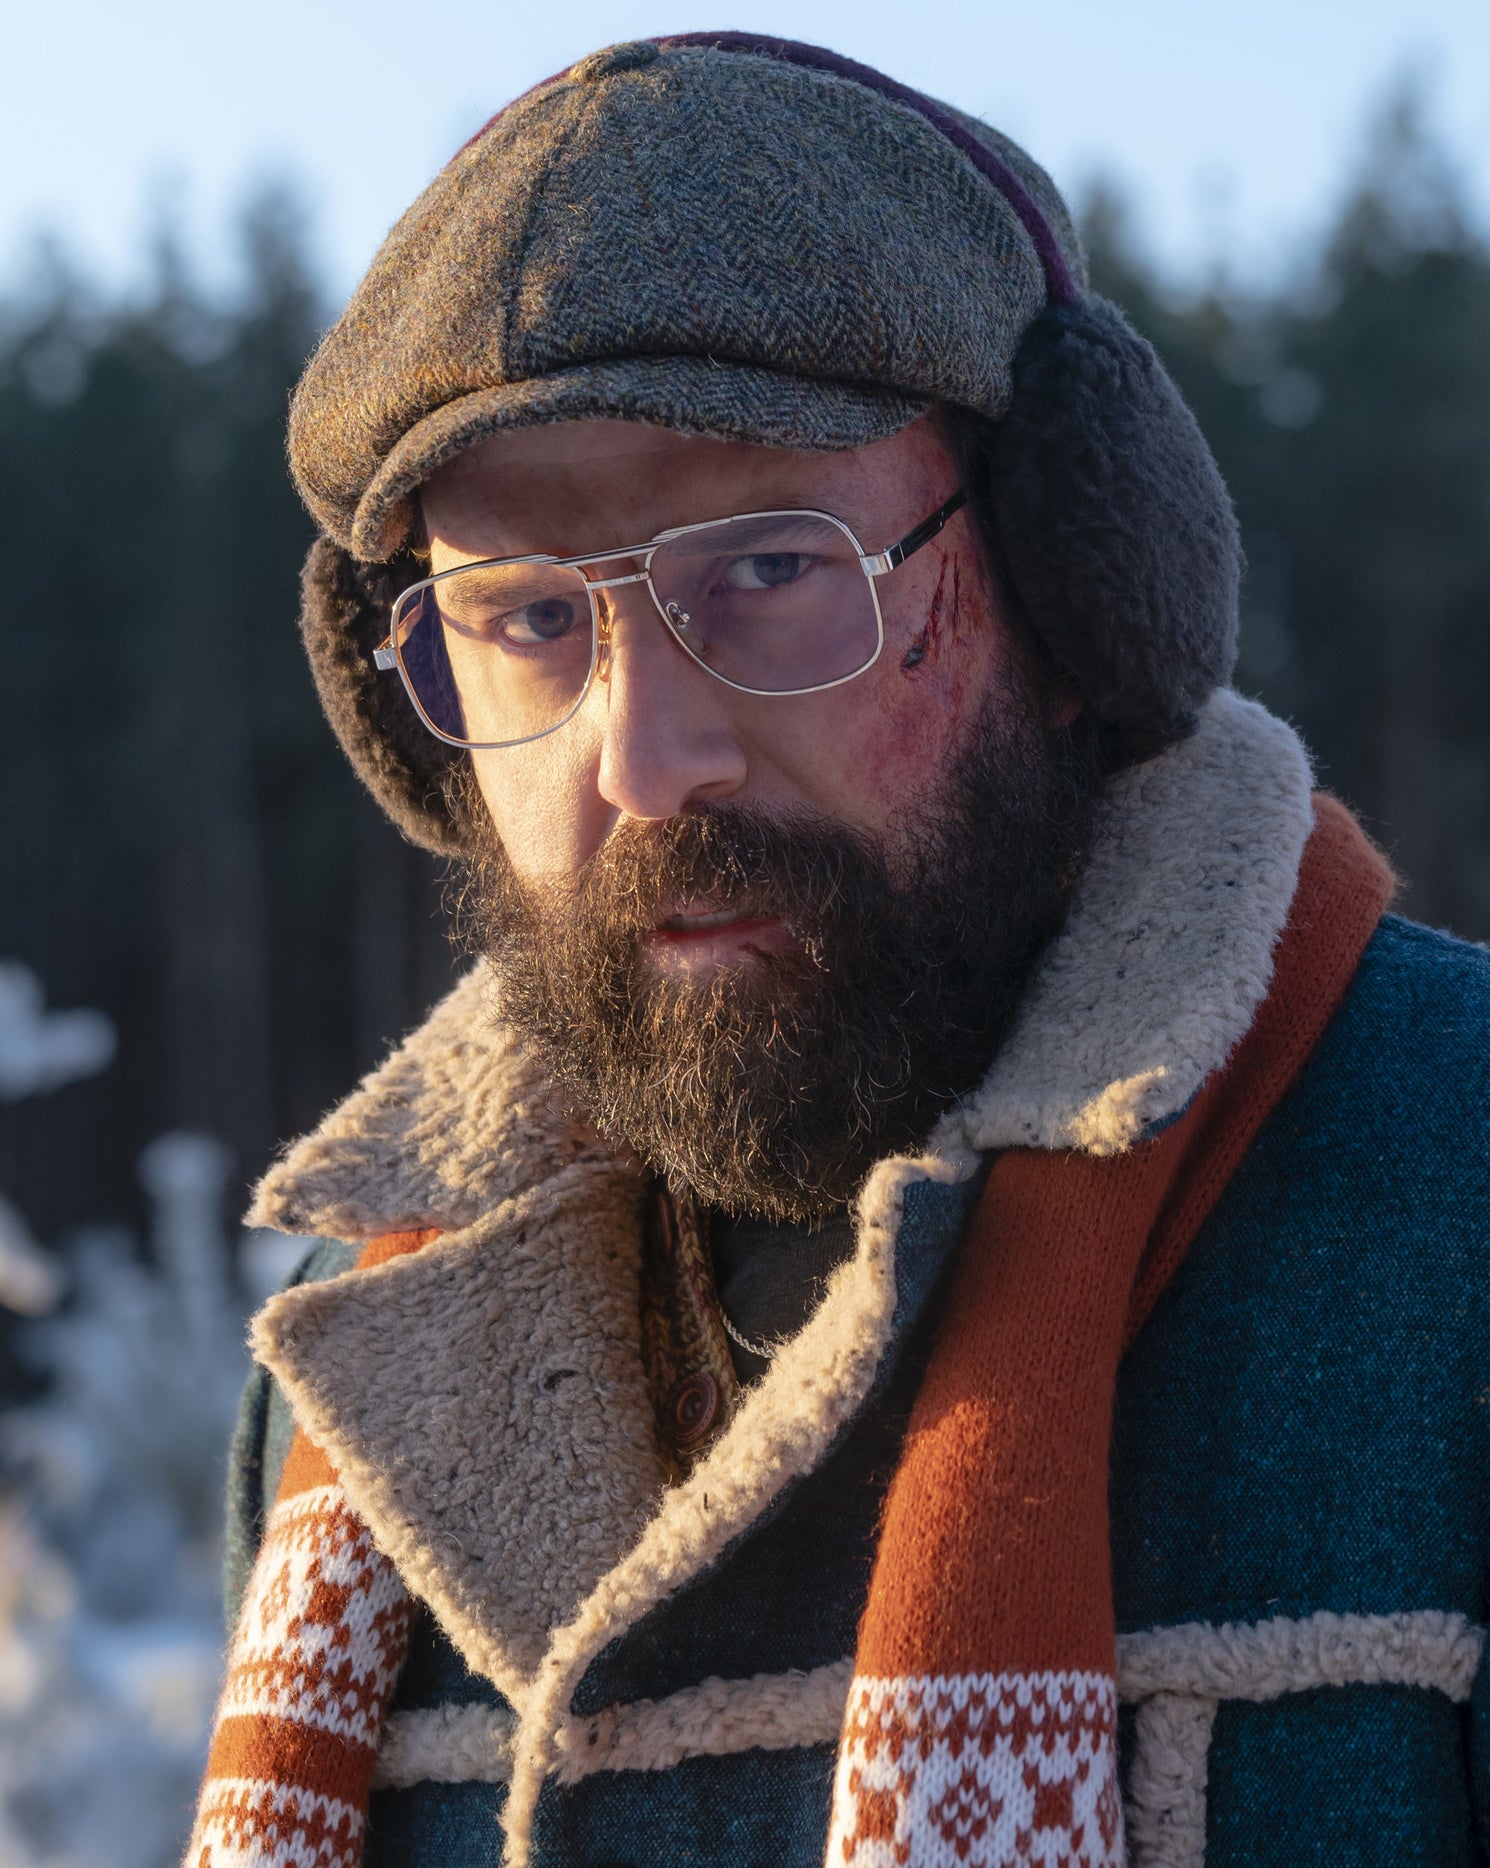 Brett Gelman with a blood-streaked face outside in the snow